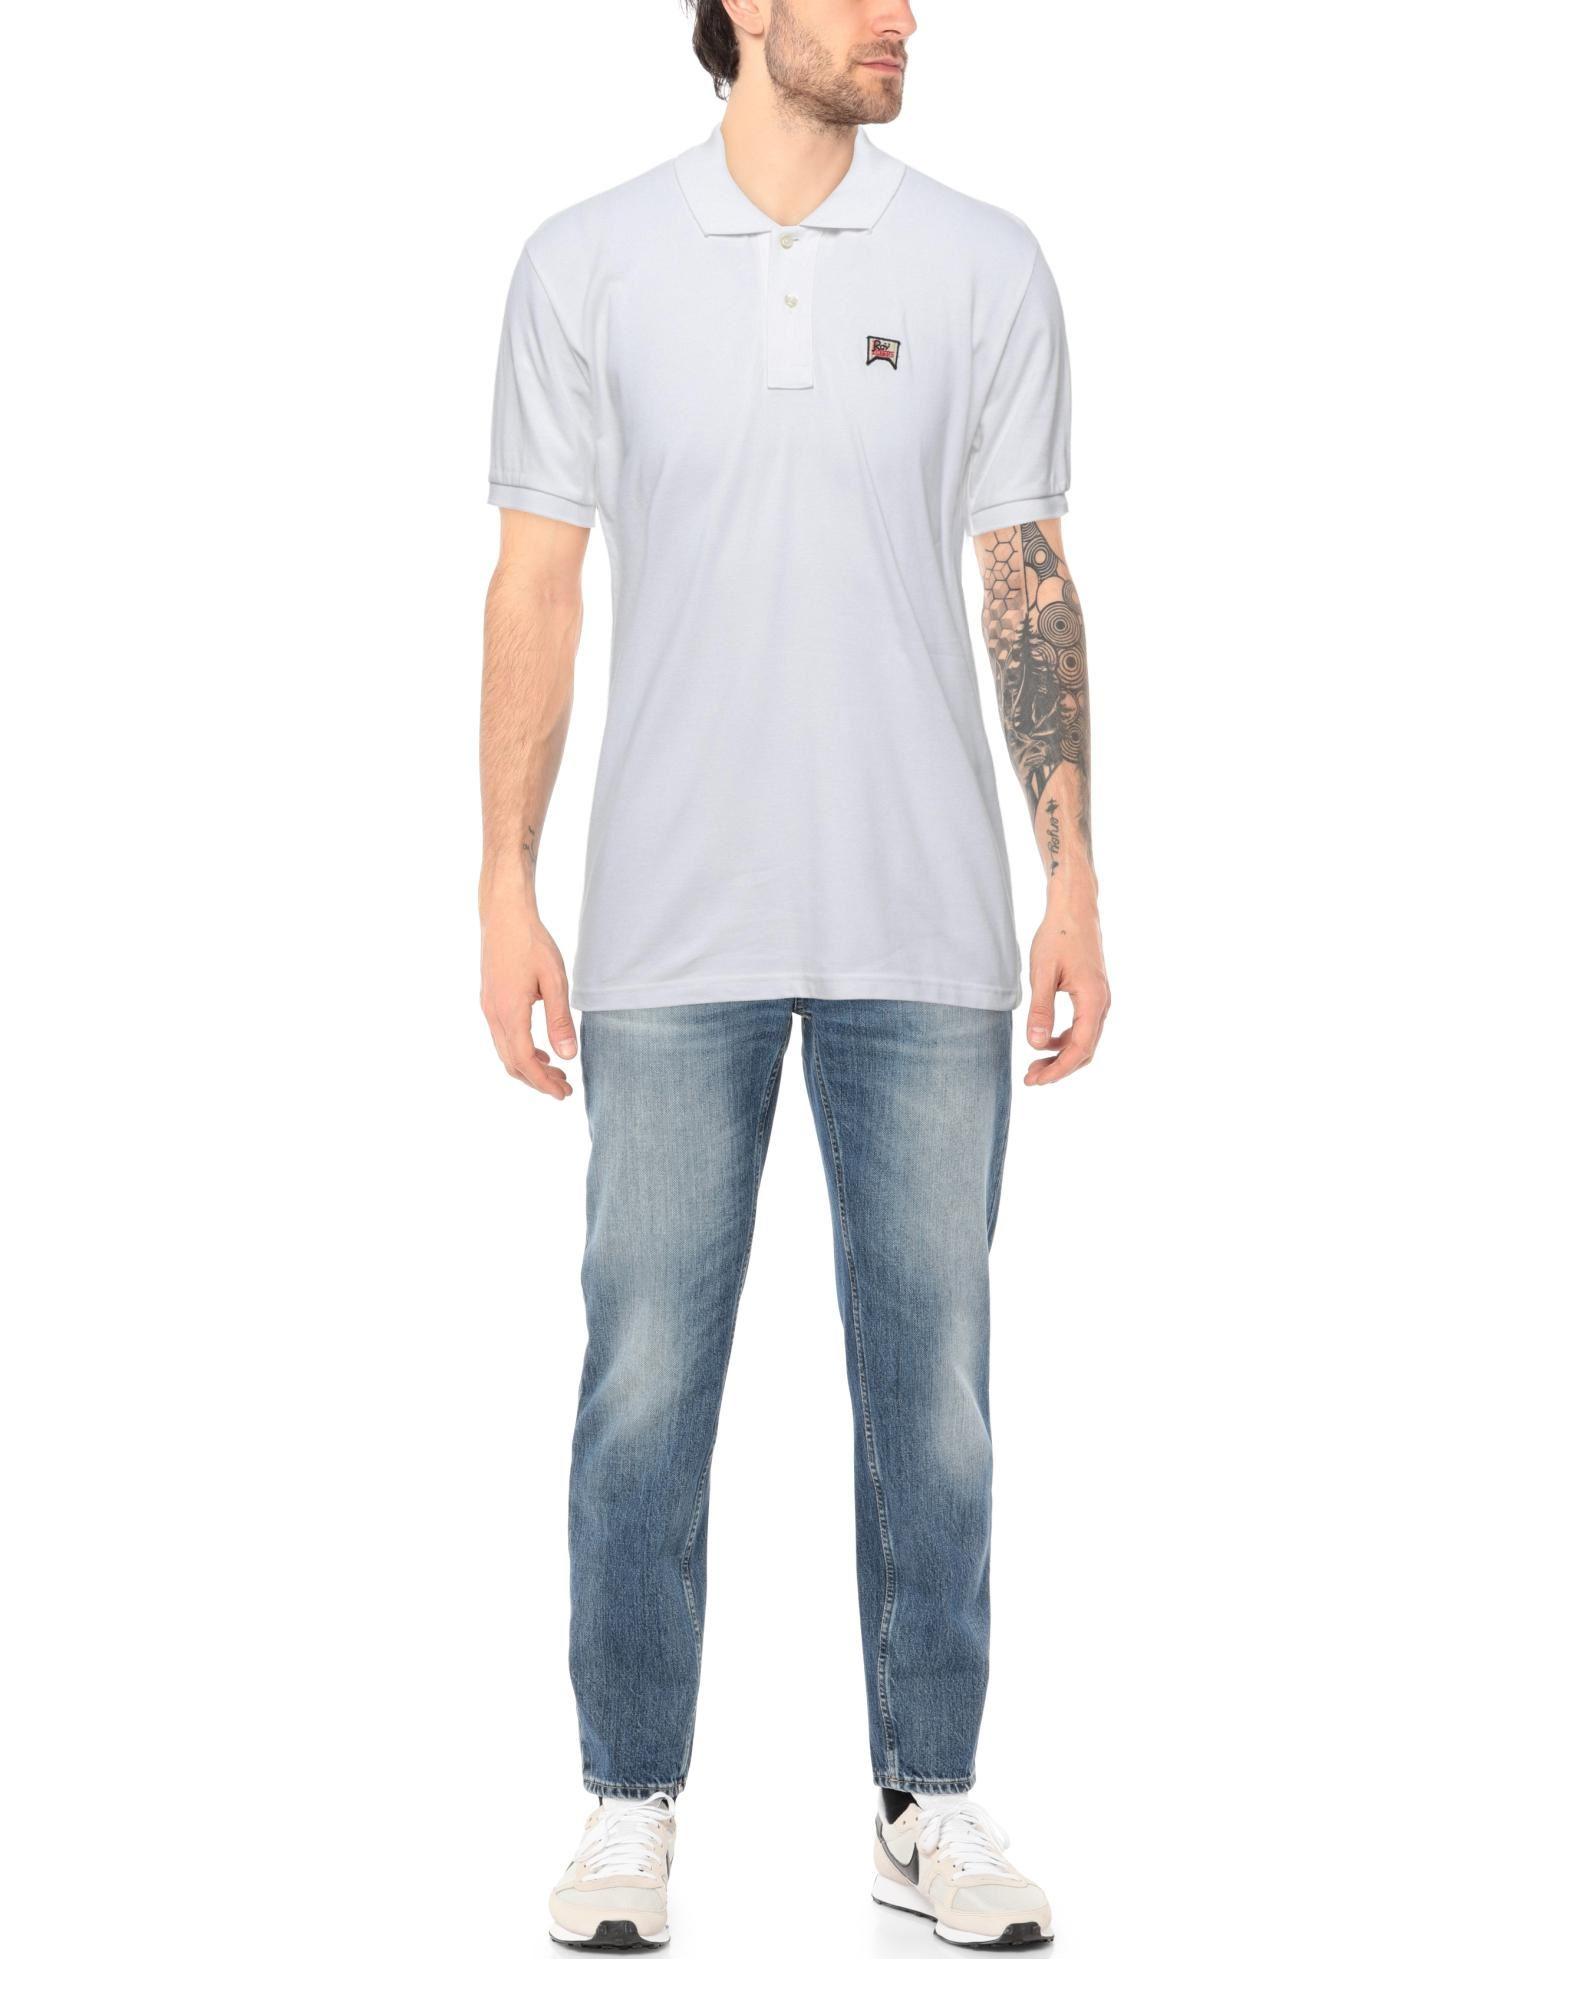 Roy Rogers Polo Shirt in White for Men - Lyst